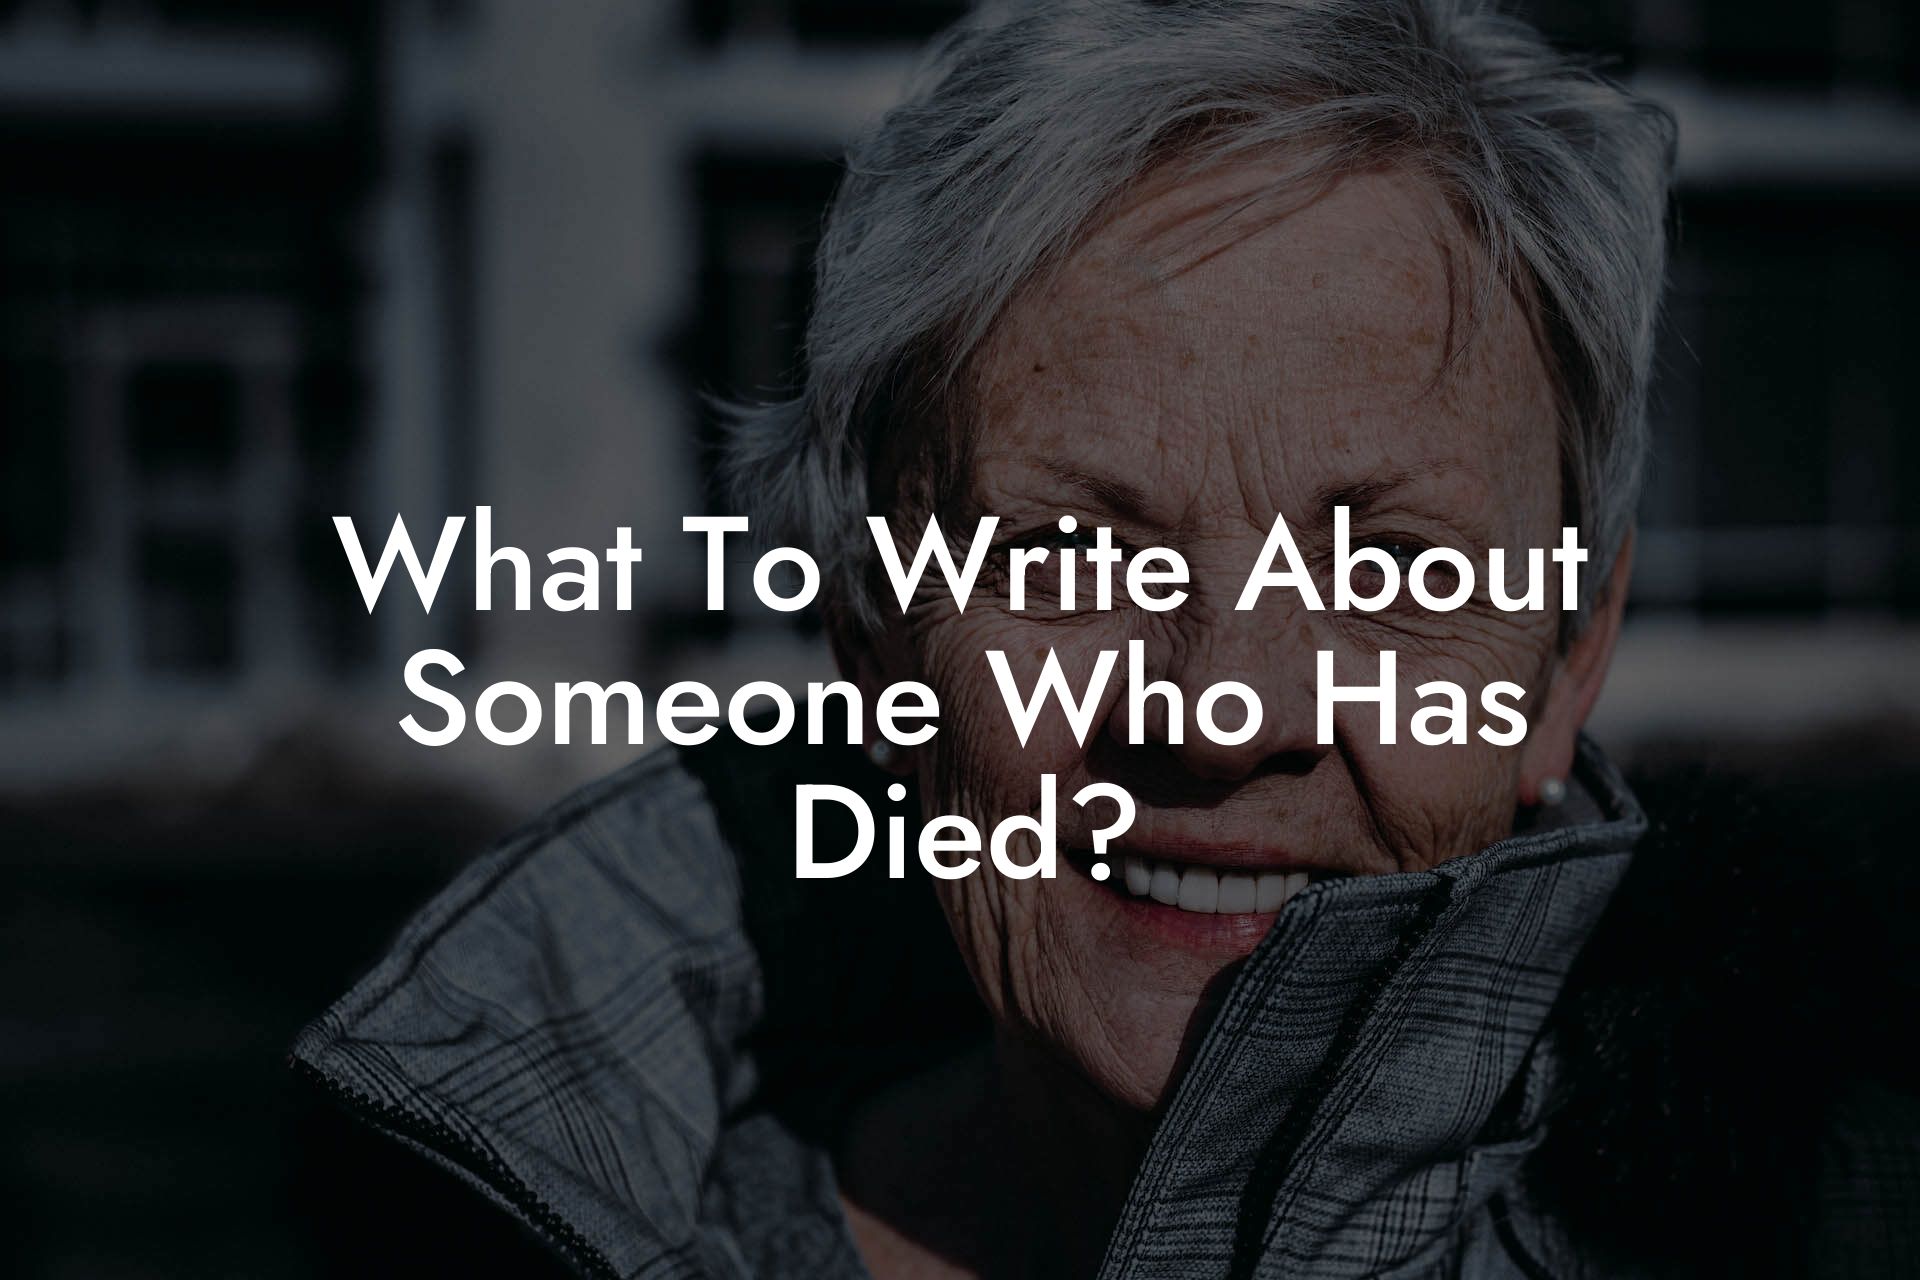 What To Write About Someone Who Has Died?